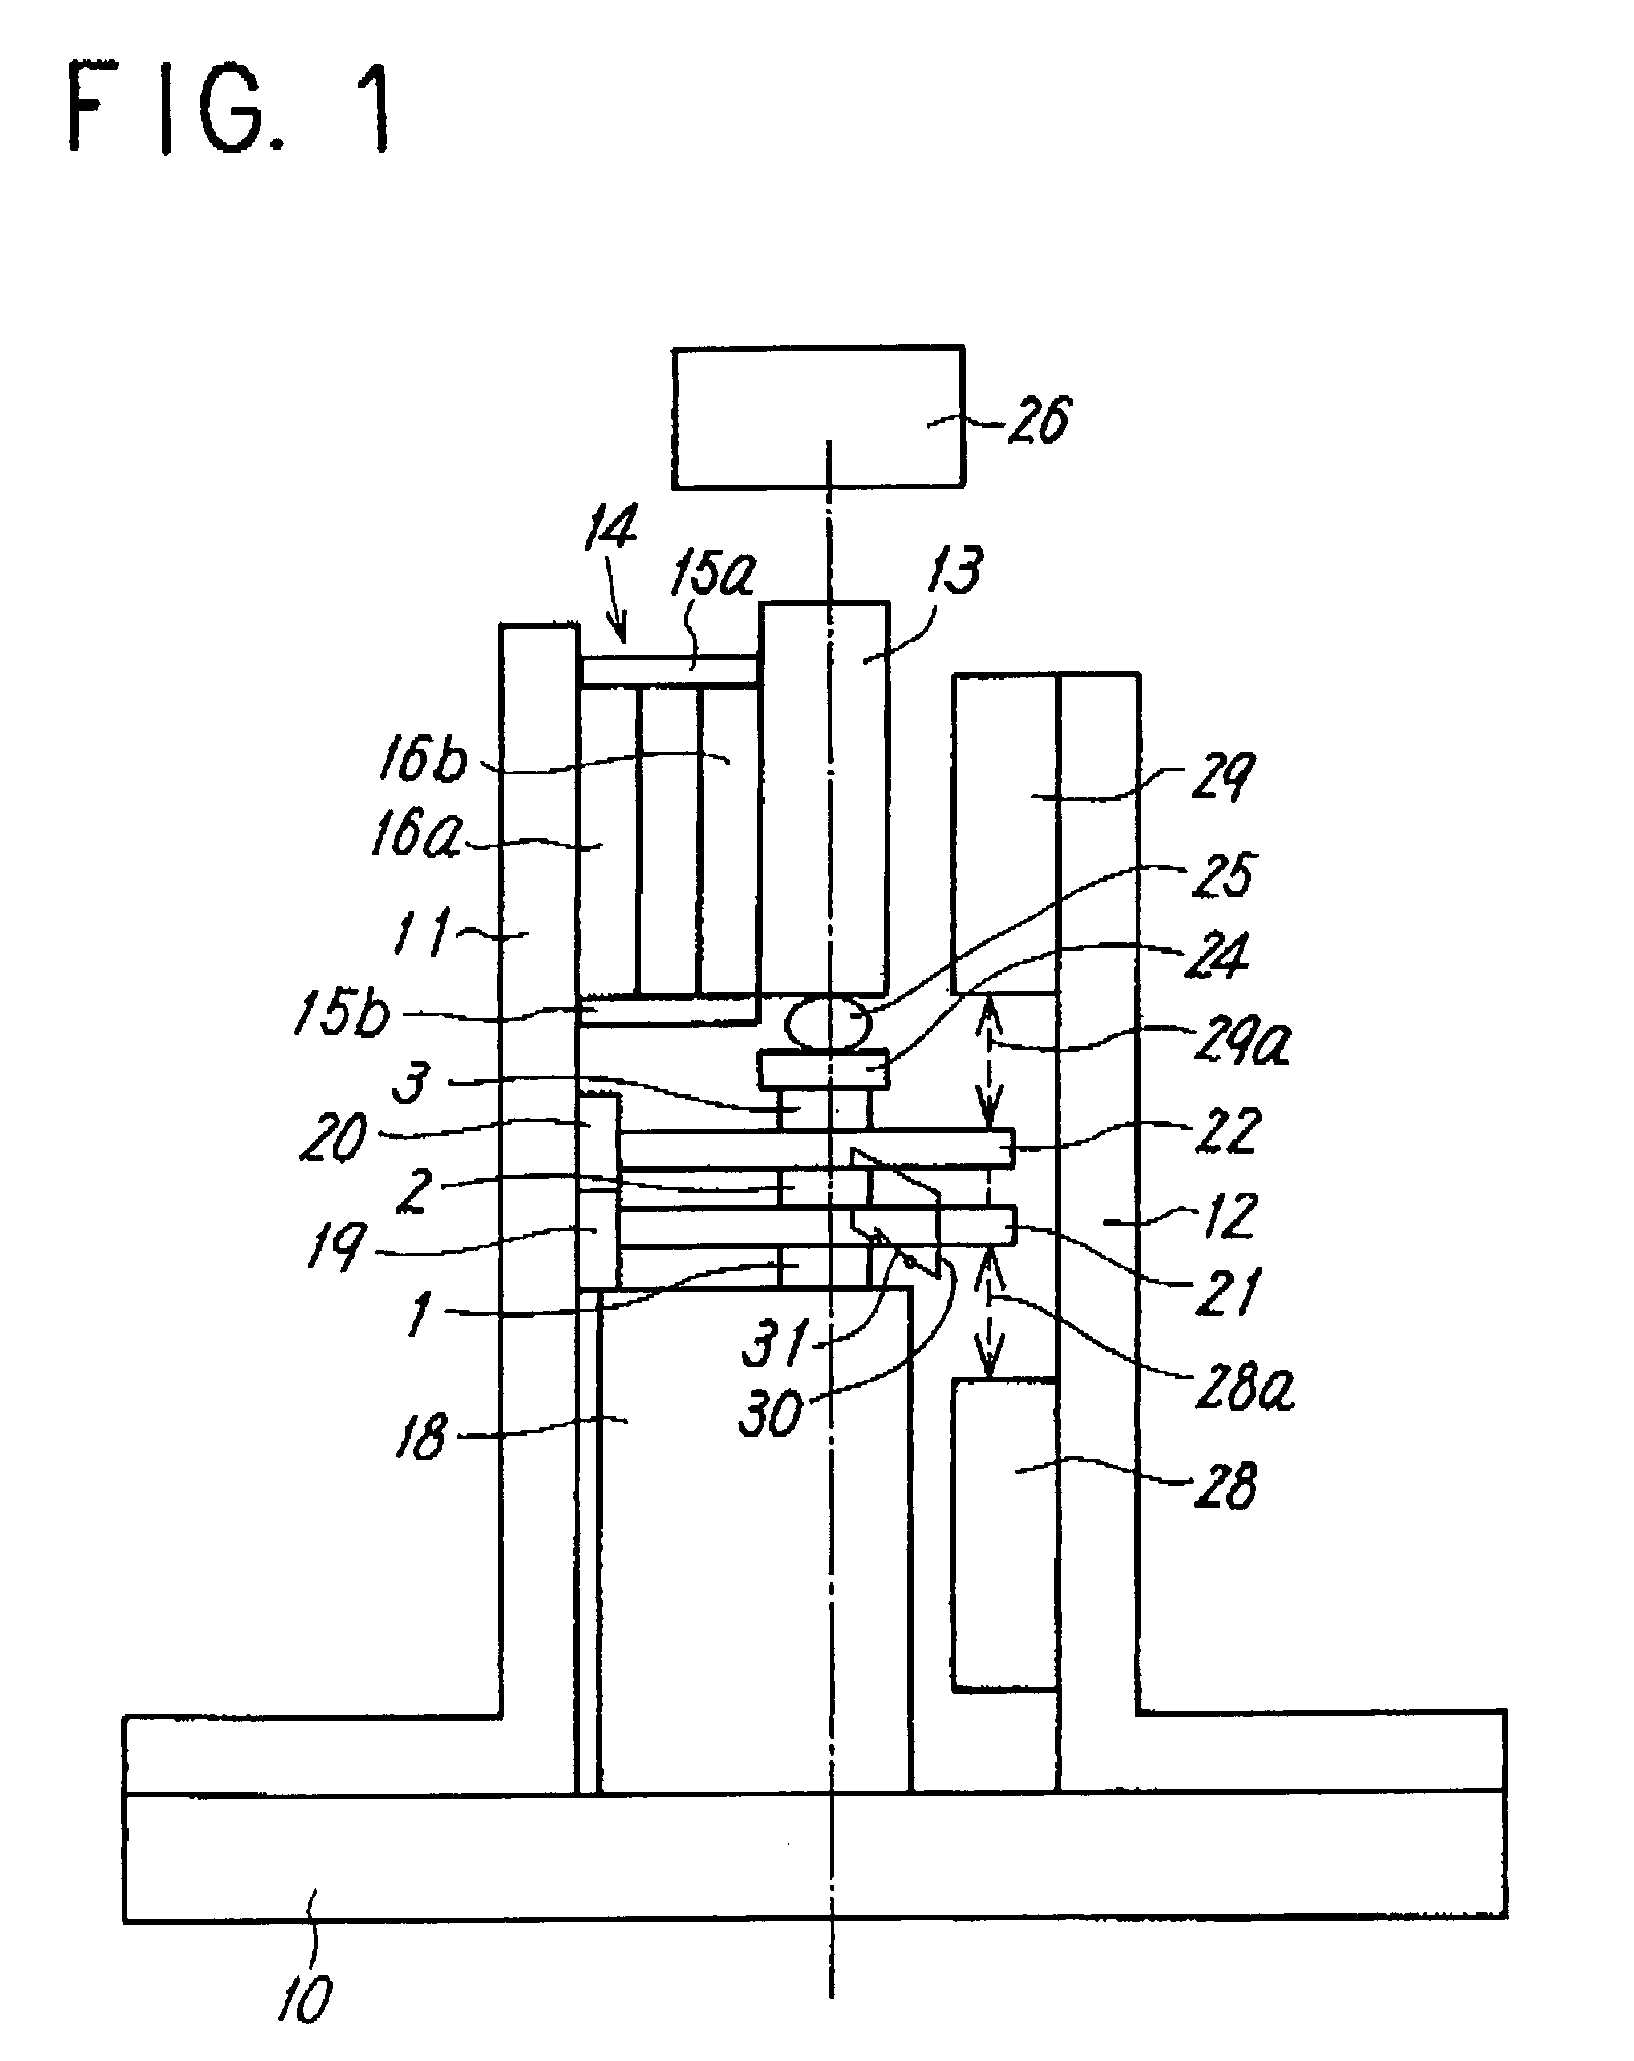 Method and apparatus for measuring material property